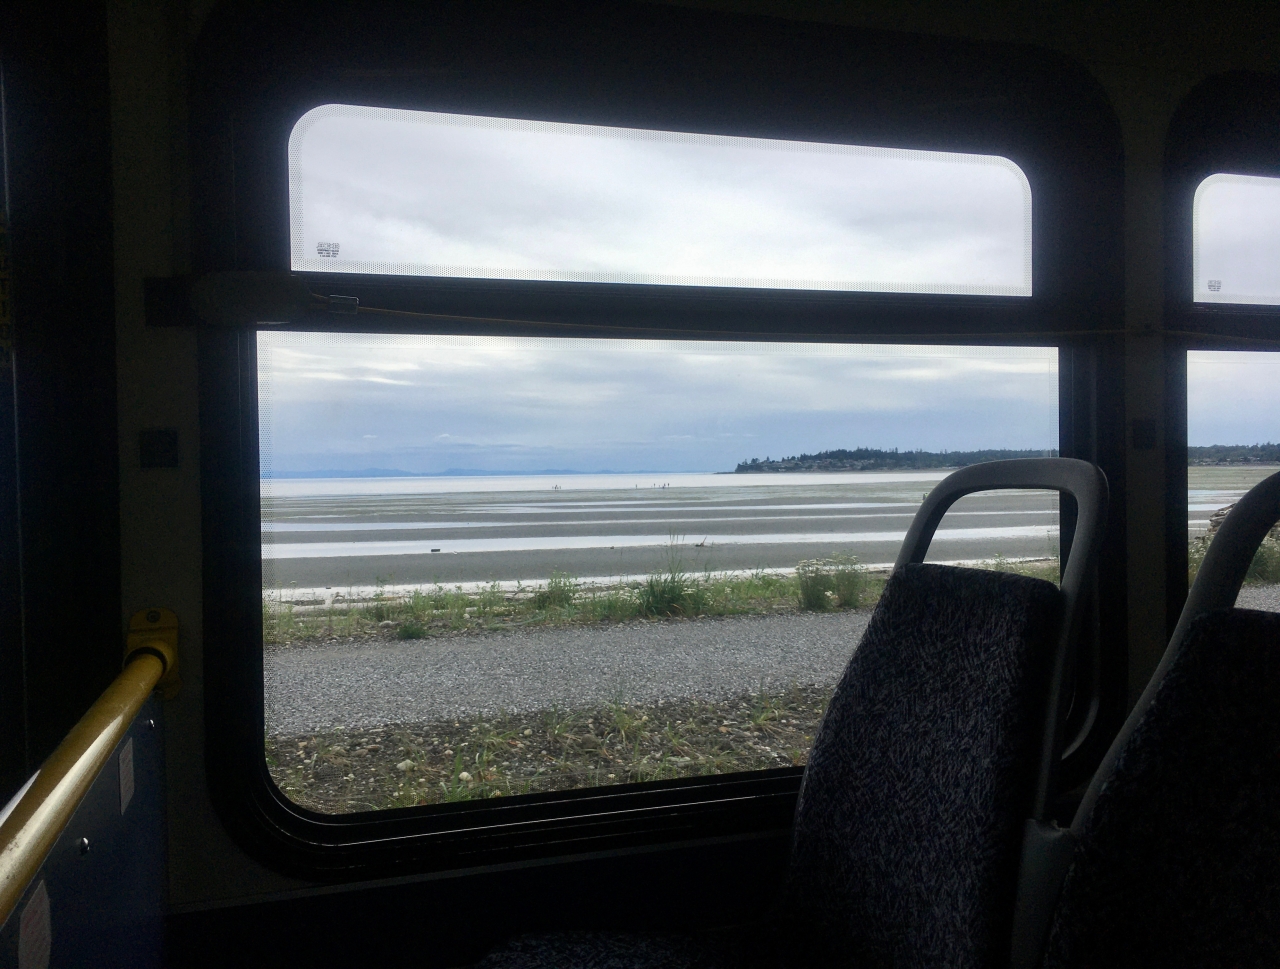 The view out to Birch Bay from a Whatcom Transportation Authority bus. The tide is low so the shoreline is off in the distance. It's a cloudy day and a peninsula sits off in the distance on the right.